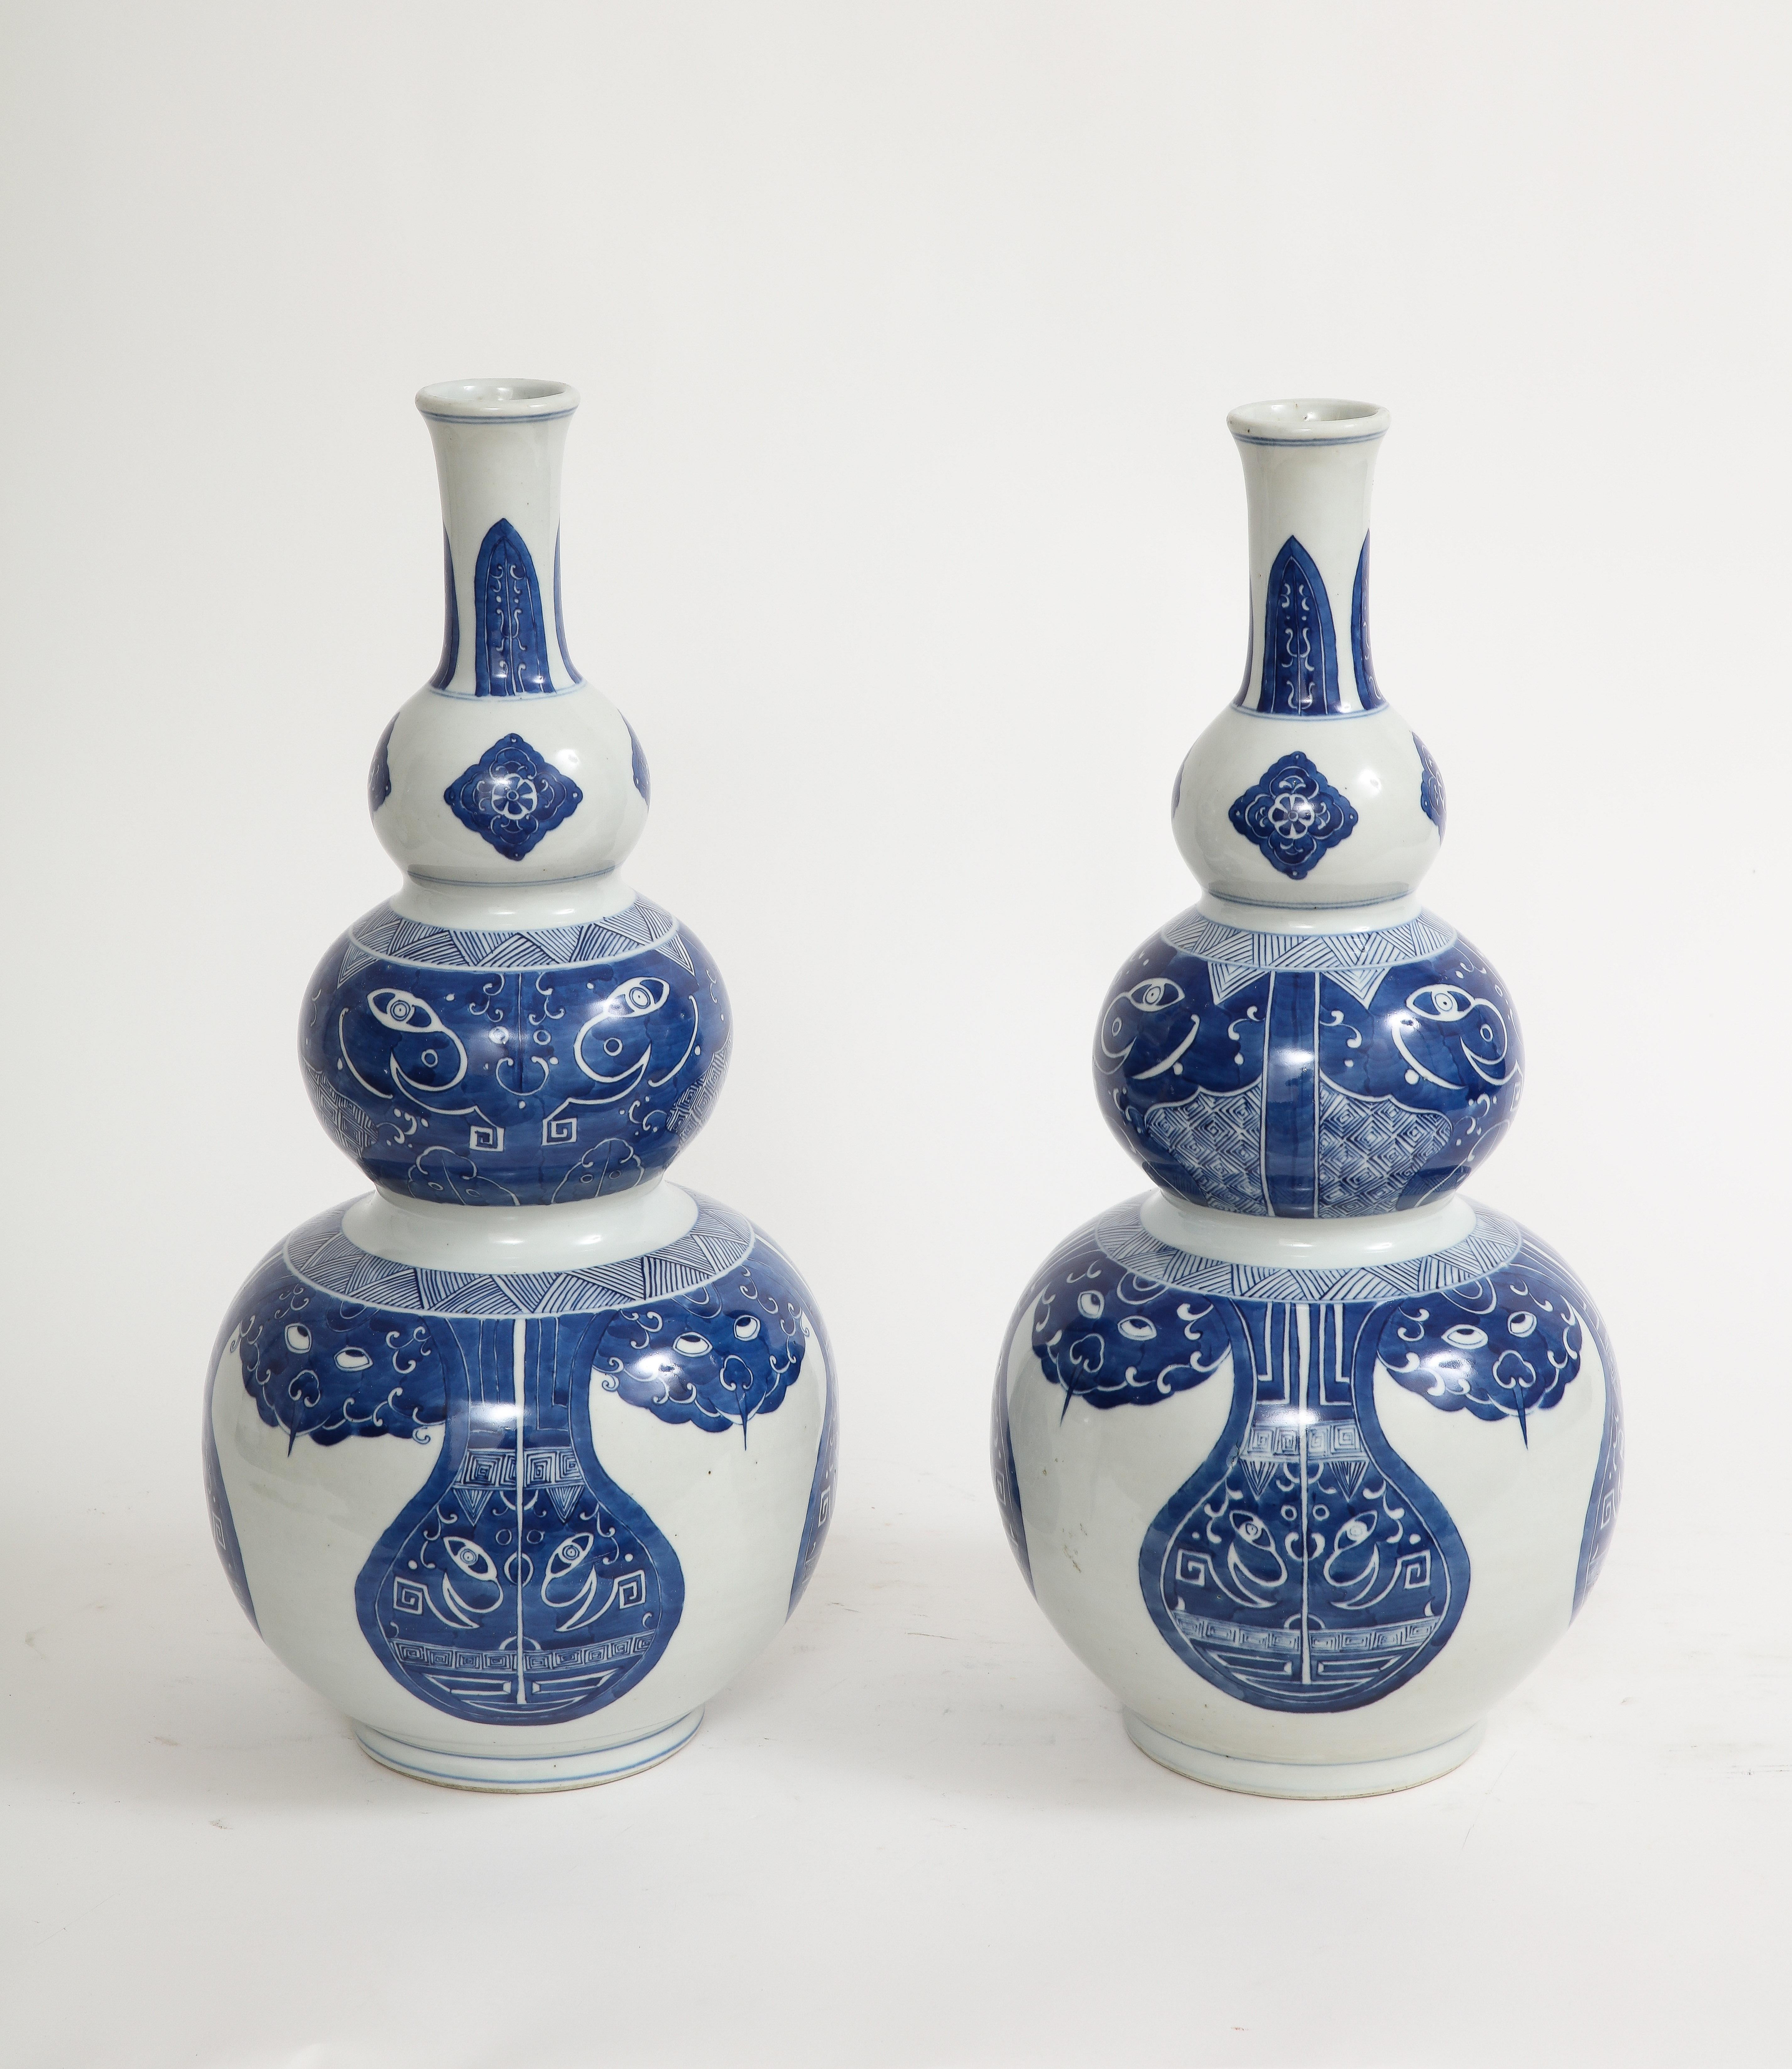 A pair of blue and white triple-gourd 'Taotie' vases, Qing Dynasty, 19th century. A pair of blue and white triple-gourd 'taotie' vases. The base of each with an apocryphal Kangxi six-character mark in underglaze blue. Triple gourd Chinese vases are